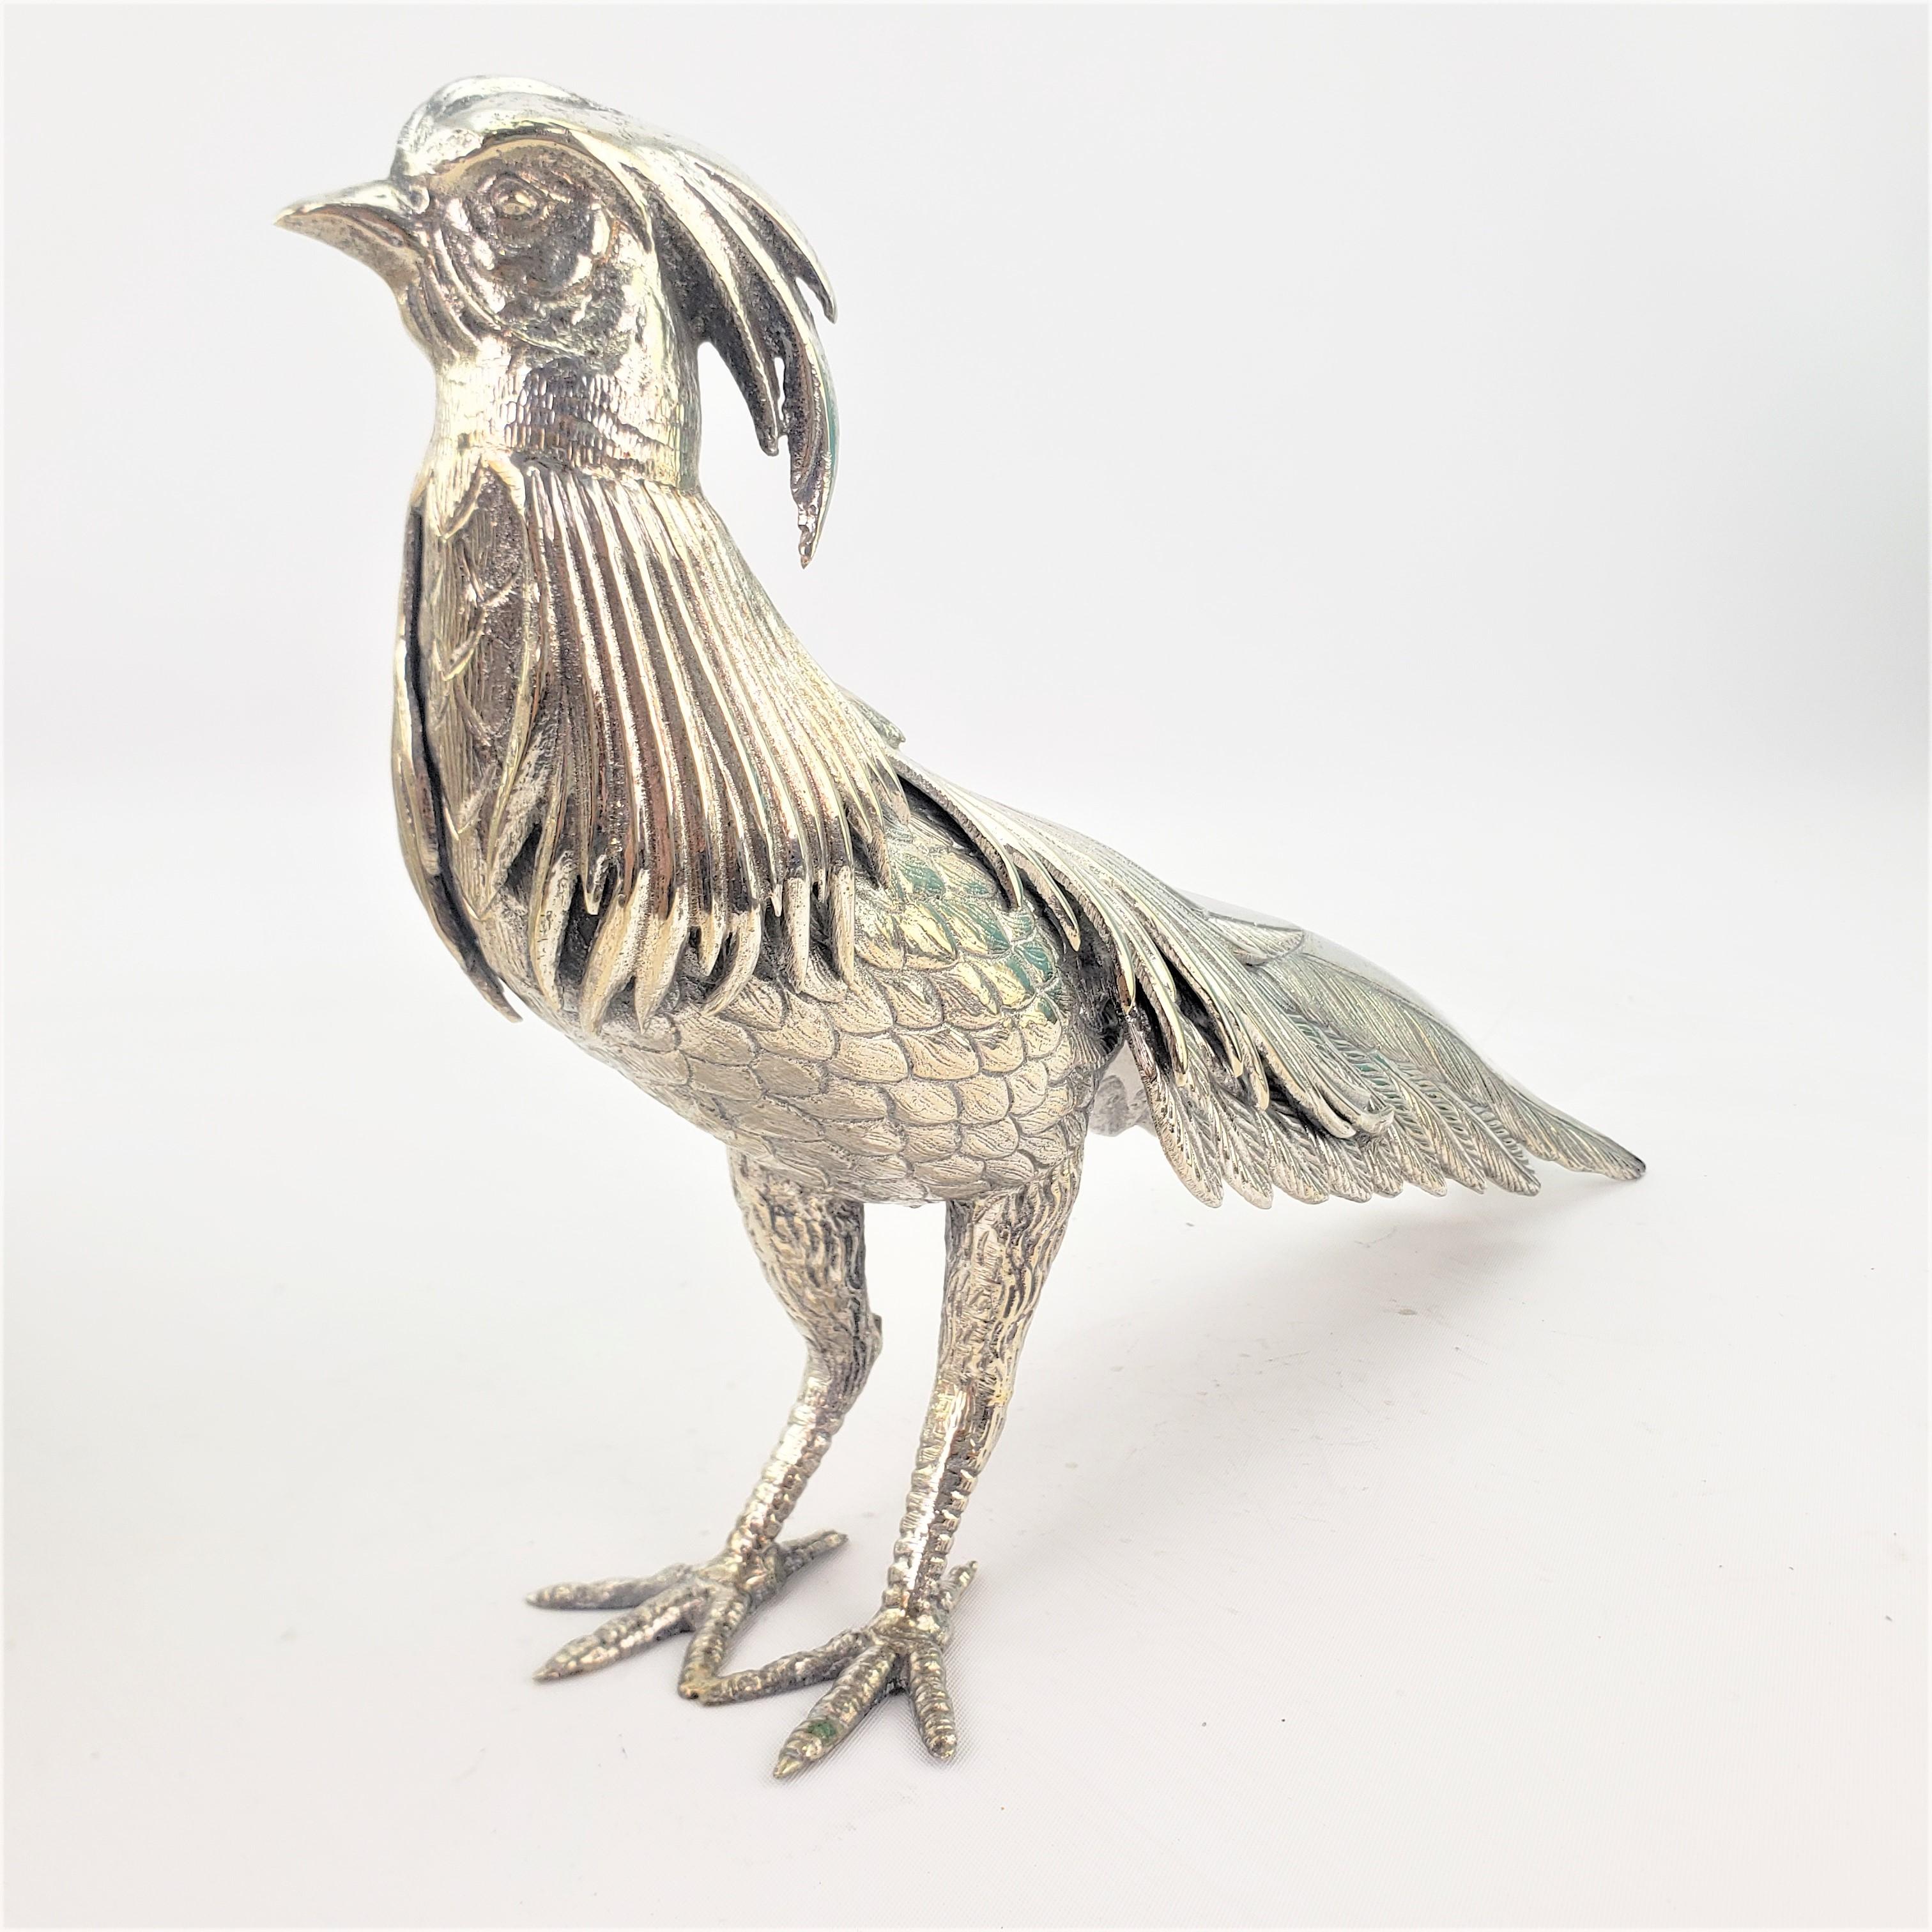 19th Century Pair of Antique Silver Plated Decorative Exotic Bird or Pheasant Sculptures